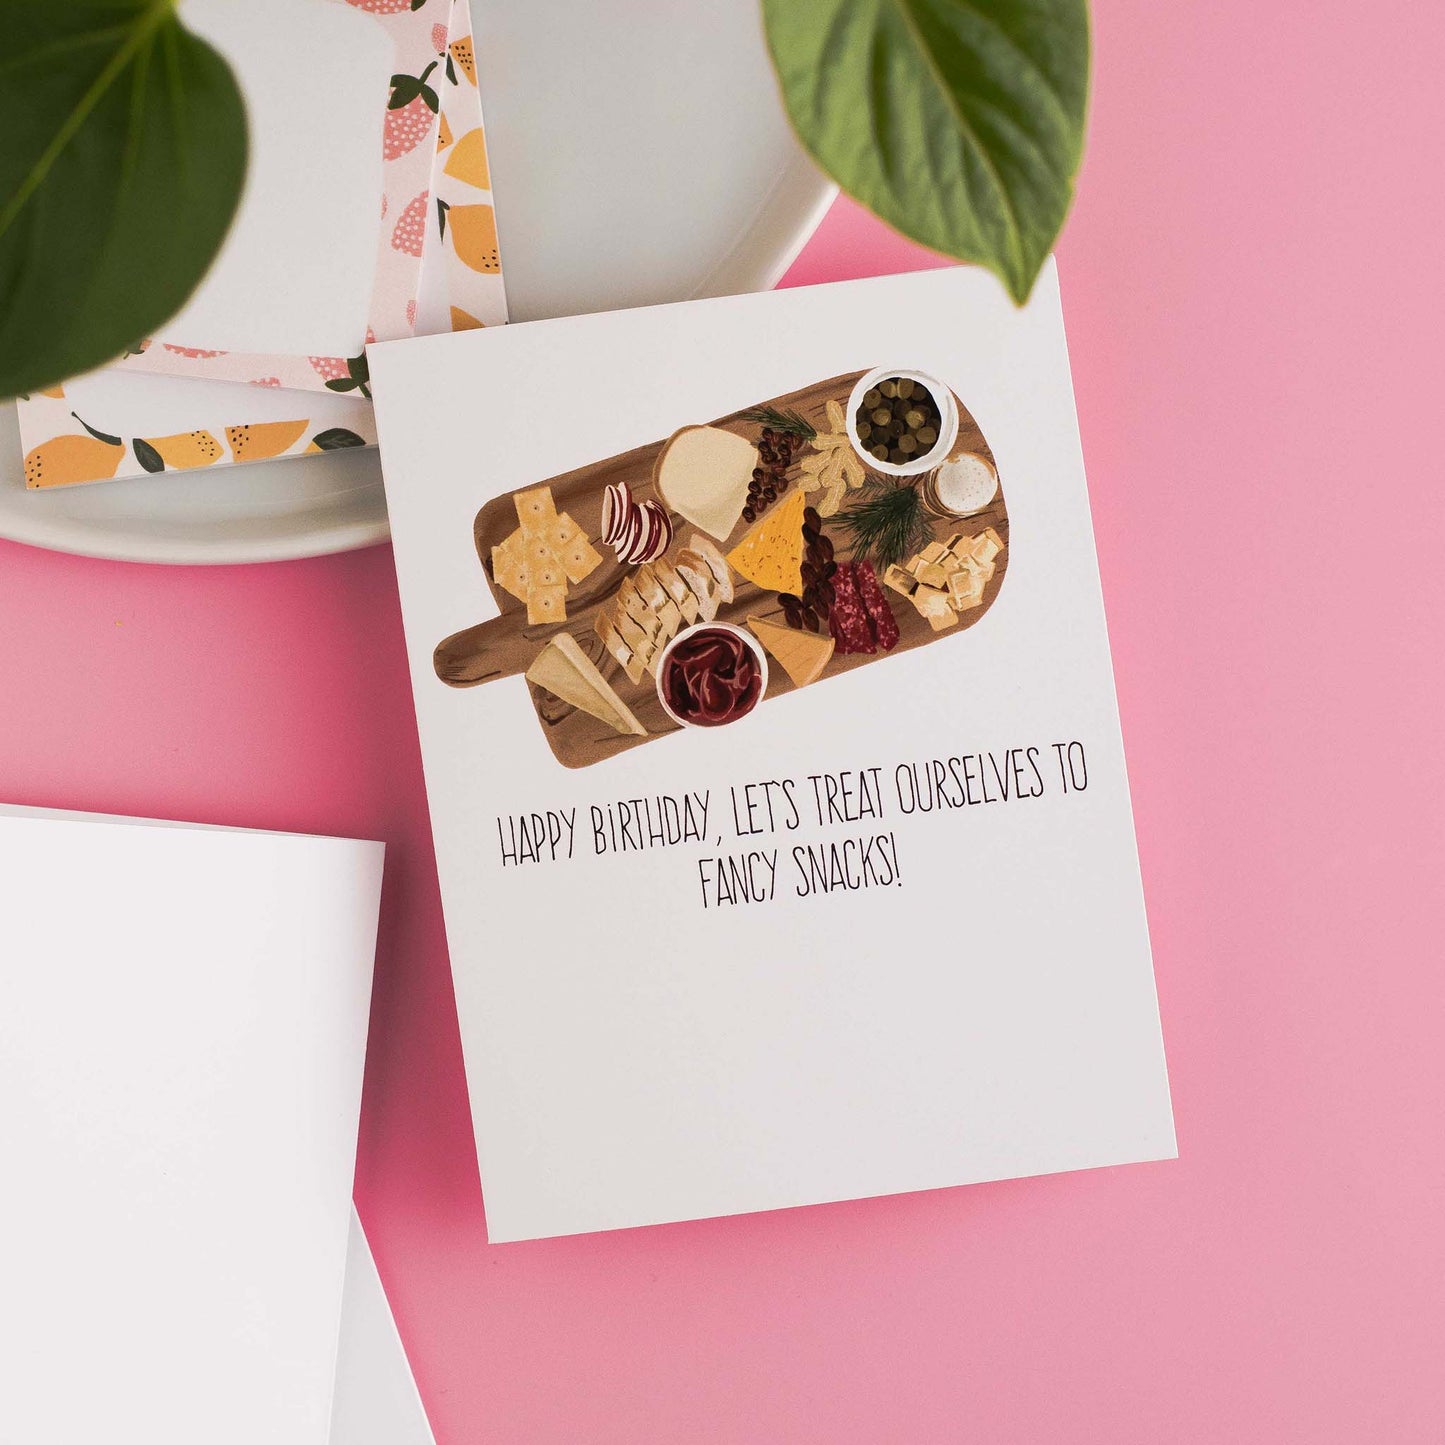 Happy Birthday! Let's Treat Ourselves To Fancy Snacks! - Greeting Card